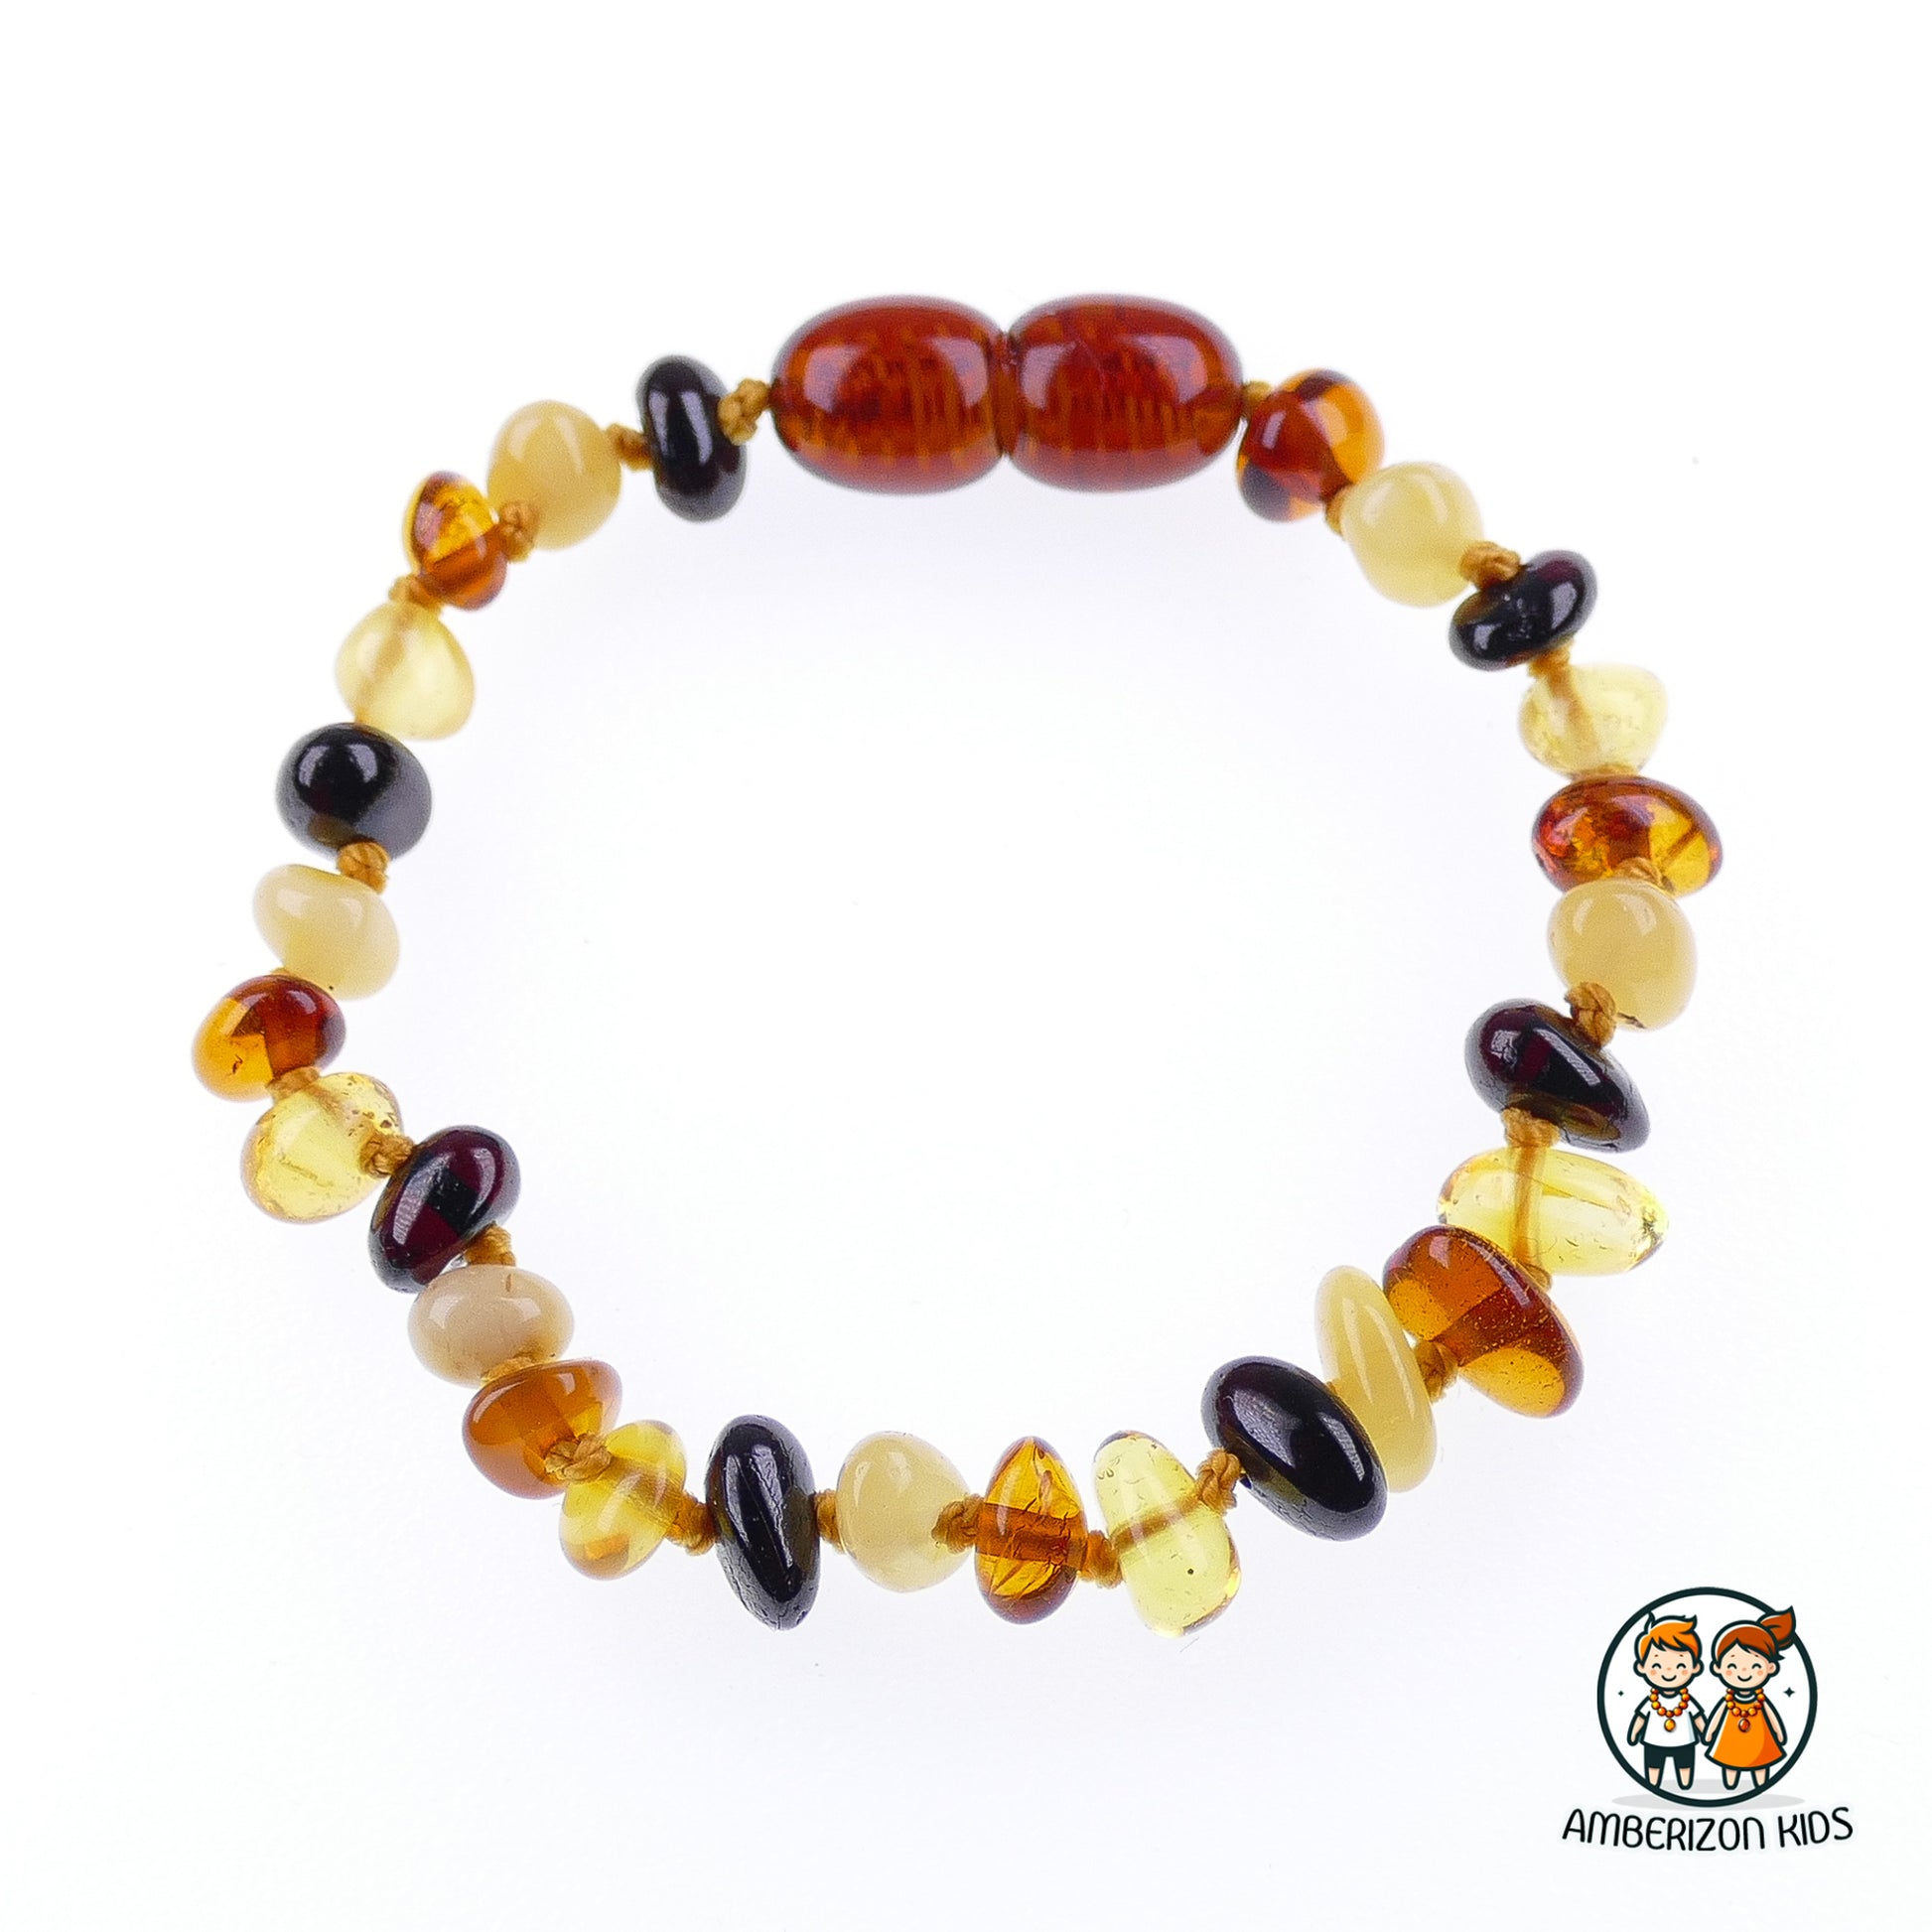 Multicolored amber baby bracelet-anklet - Smooth clear translucent chip beads